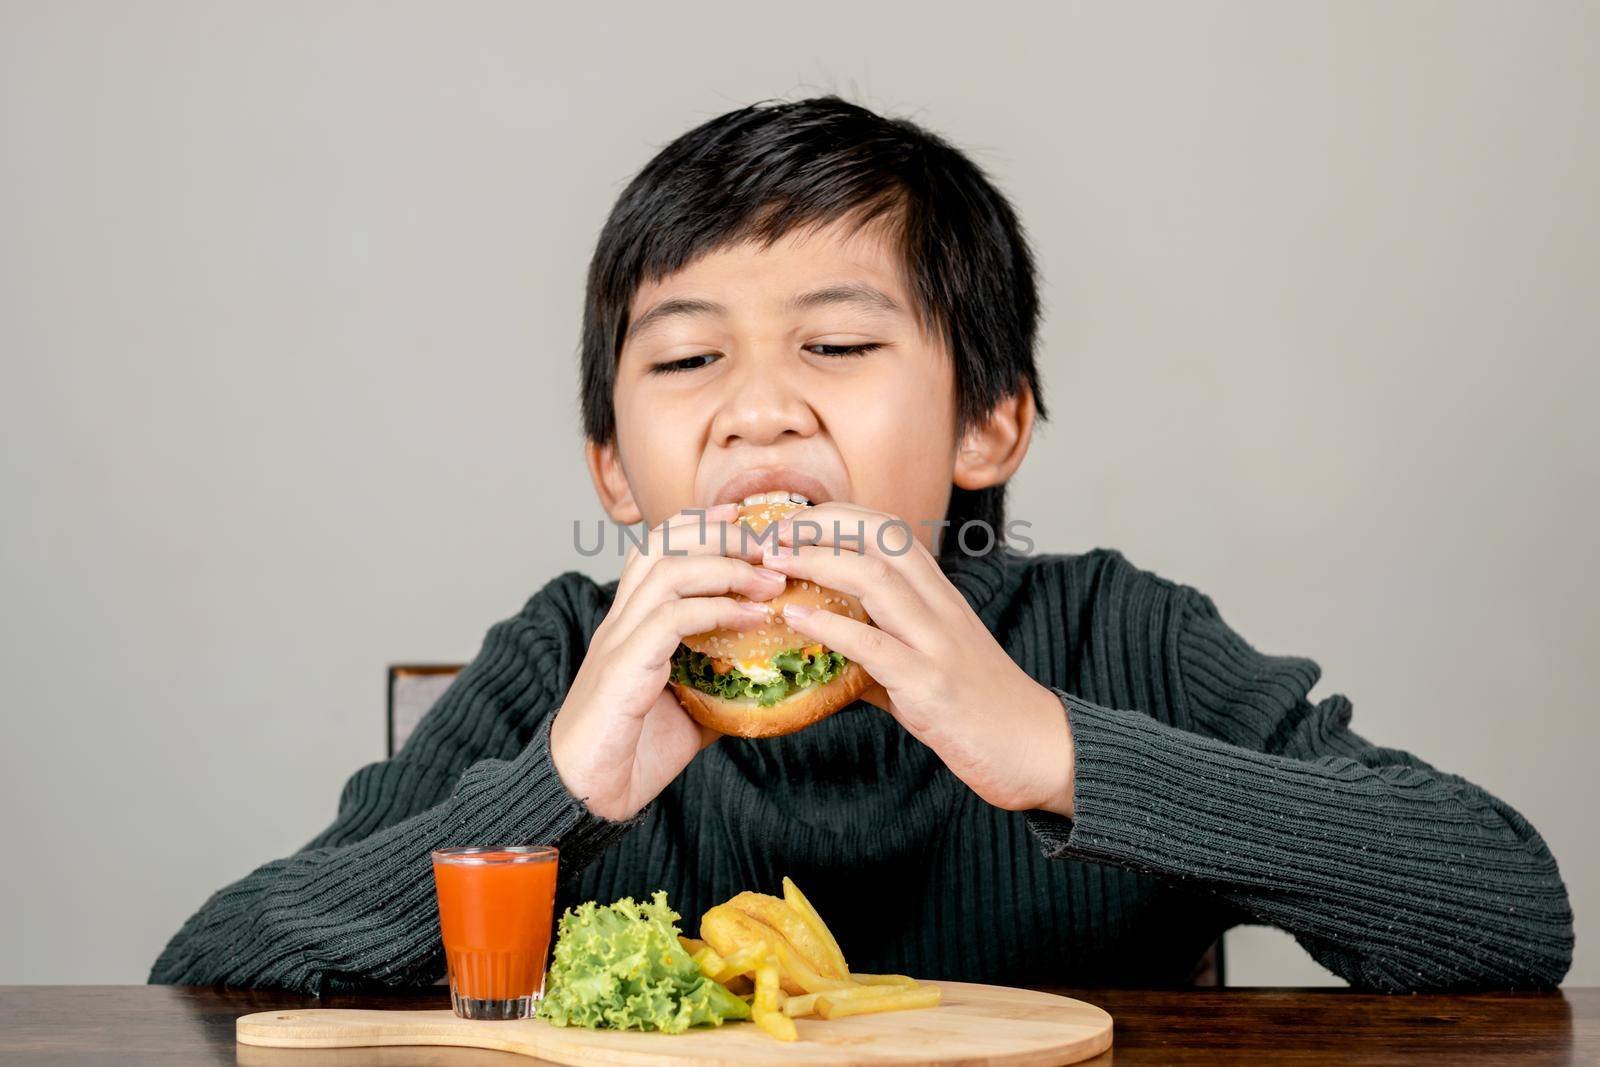 Cute Asian boy eating a delicious hamburger with happiness